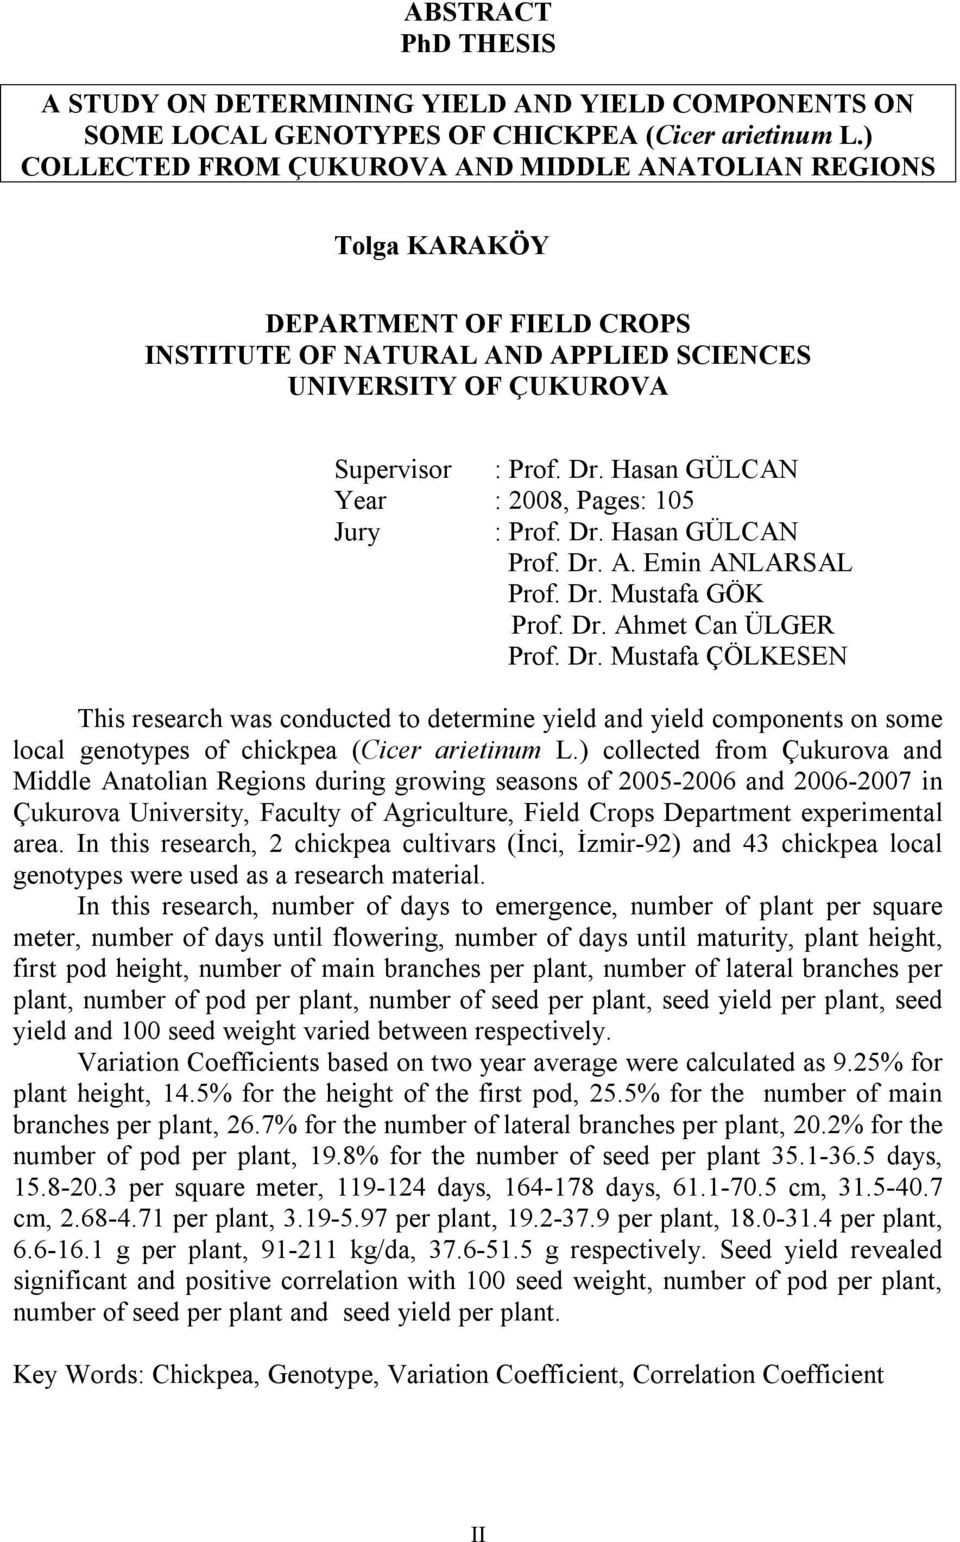 Hasan GÜLCAN Year : 2008, Pages: 105 Jury : Prof. Dr. Hasan GÜLCAN Prof. Dr. A. Emin ANLARSAL Prof. Dr. Mustafa GÖK Prof. Dr. Ahmet Can ÜLGER Prof. Dr. Mustafa ÇÖLKESEN This research was conducted to determine yield and yield components on some local genotypes of chickpea (Cicer arietinum L.